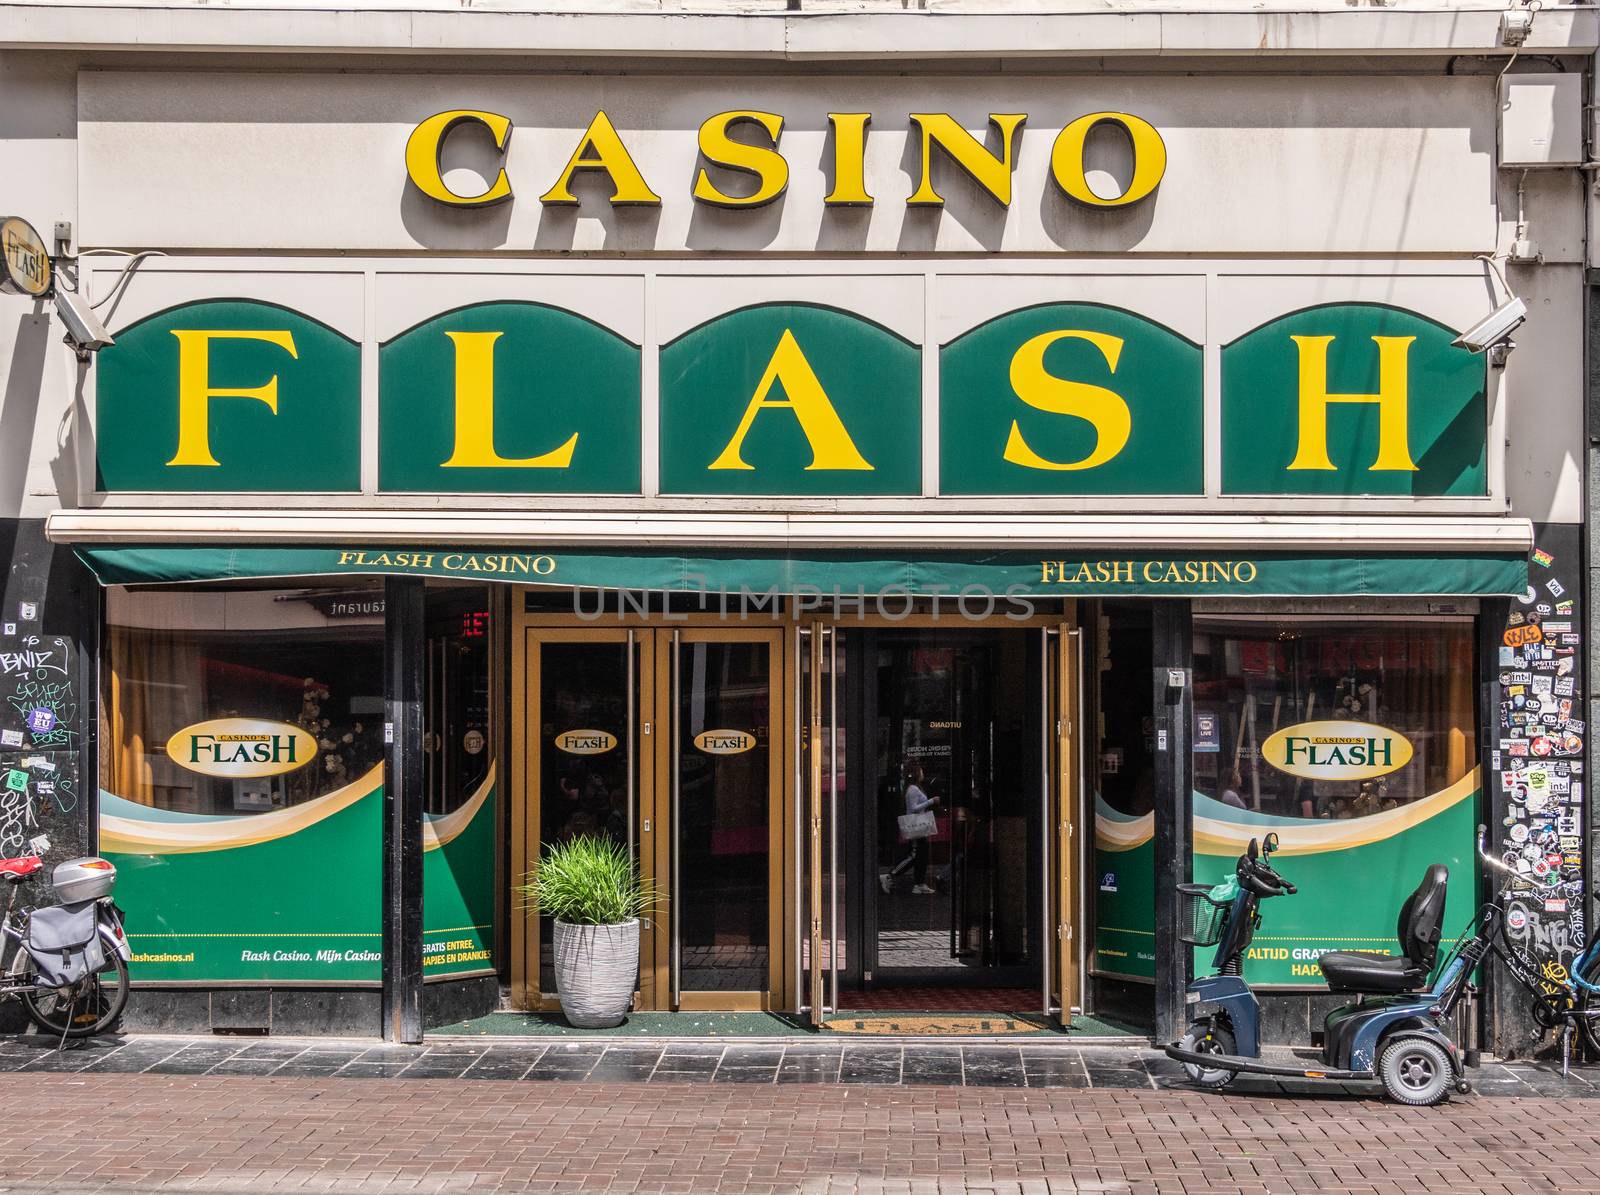 Amsterdam, the Netherlands - July 1, 2019: Green-white entrance and display window of Flash Casino with motorized wheelchair up front.